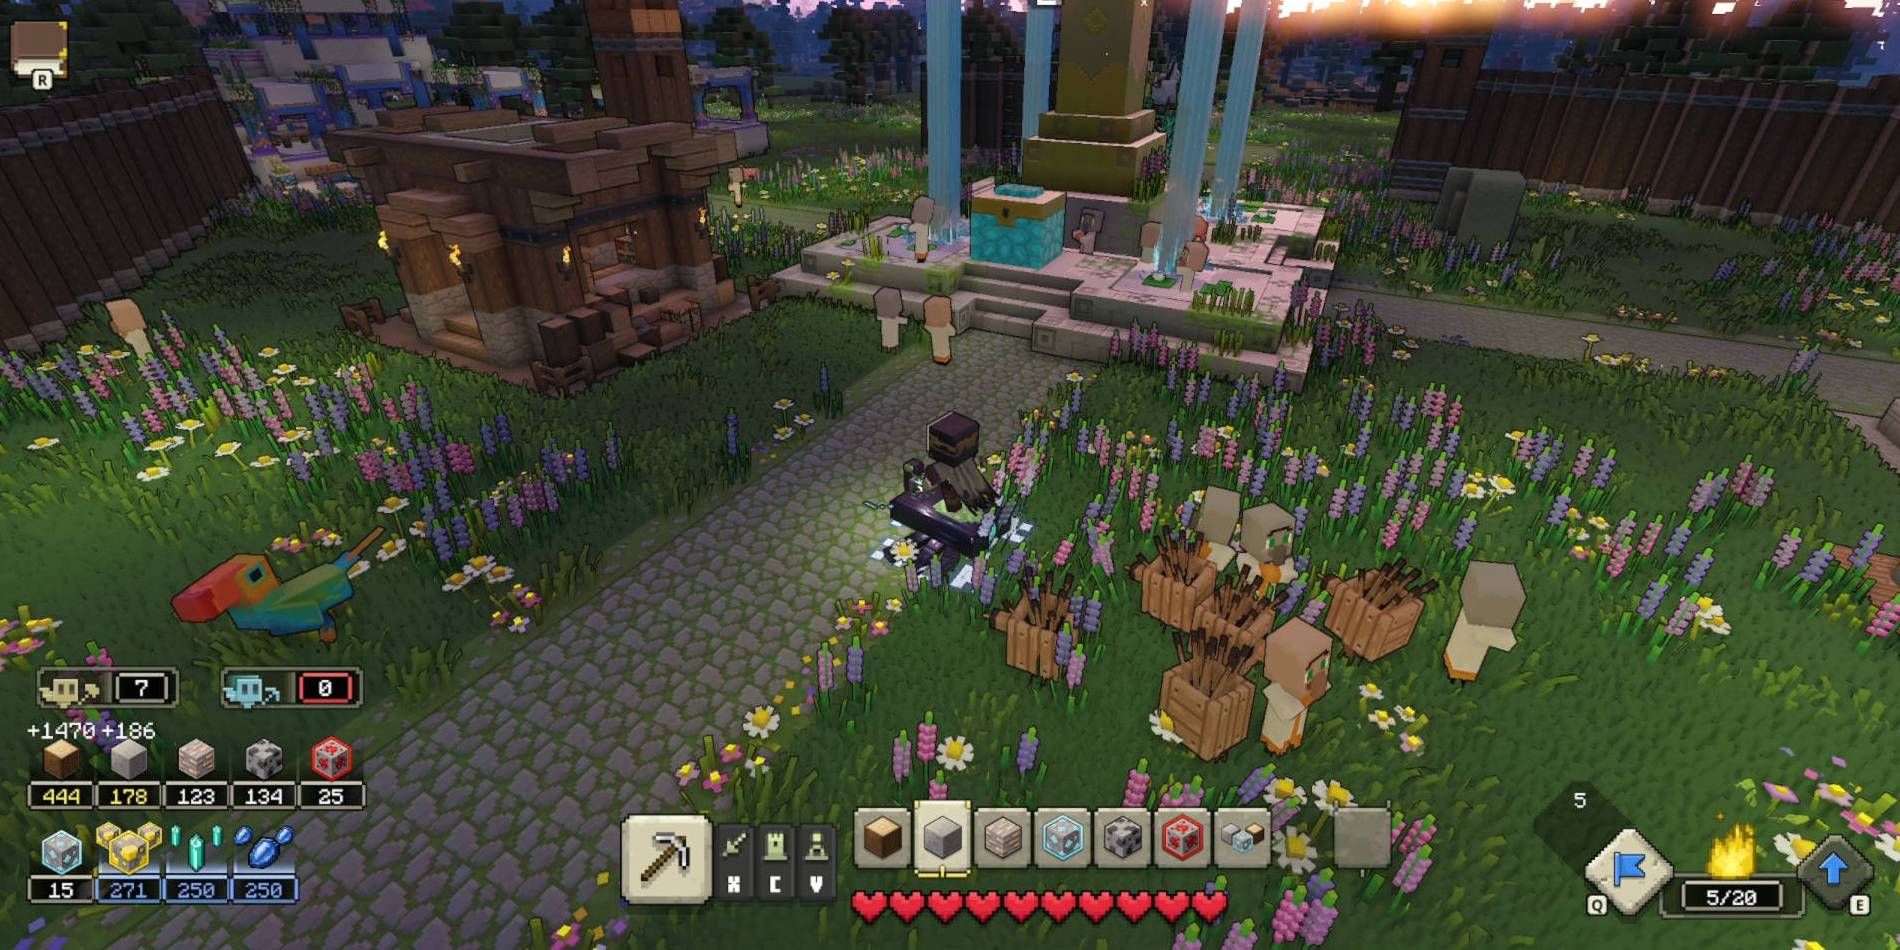 Minecraft Legends Managing Home Village with Resources used to Build Like Lapis, Redstone, and Iron